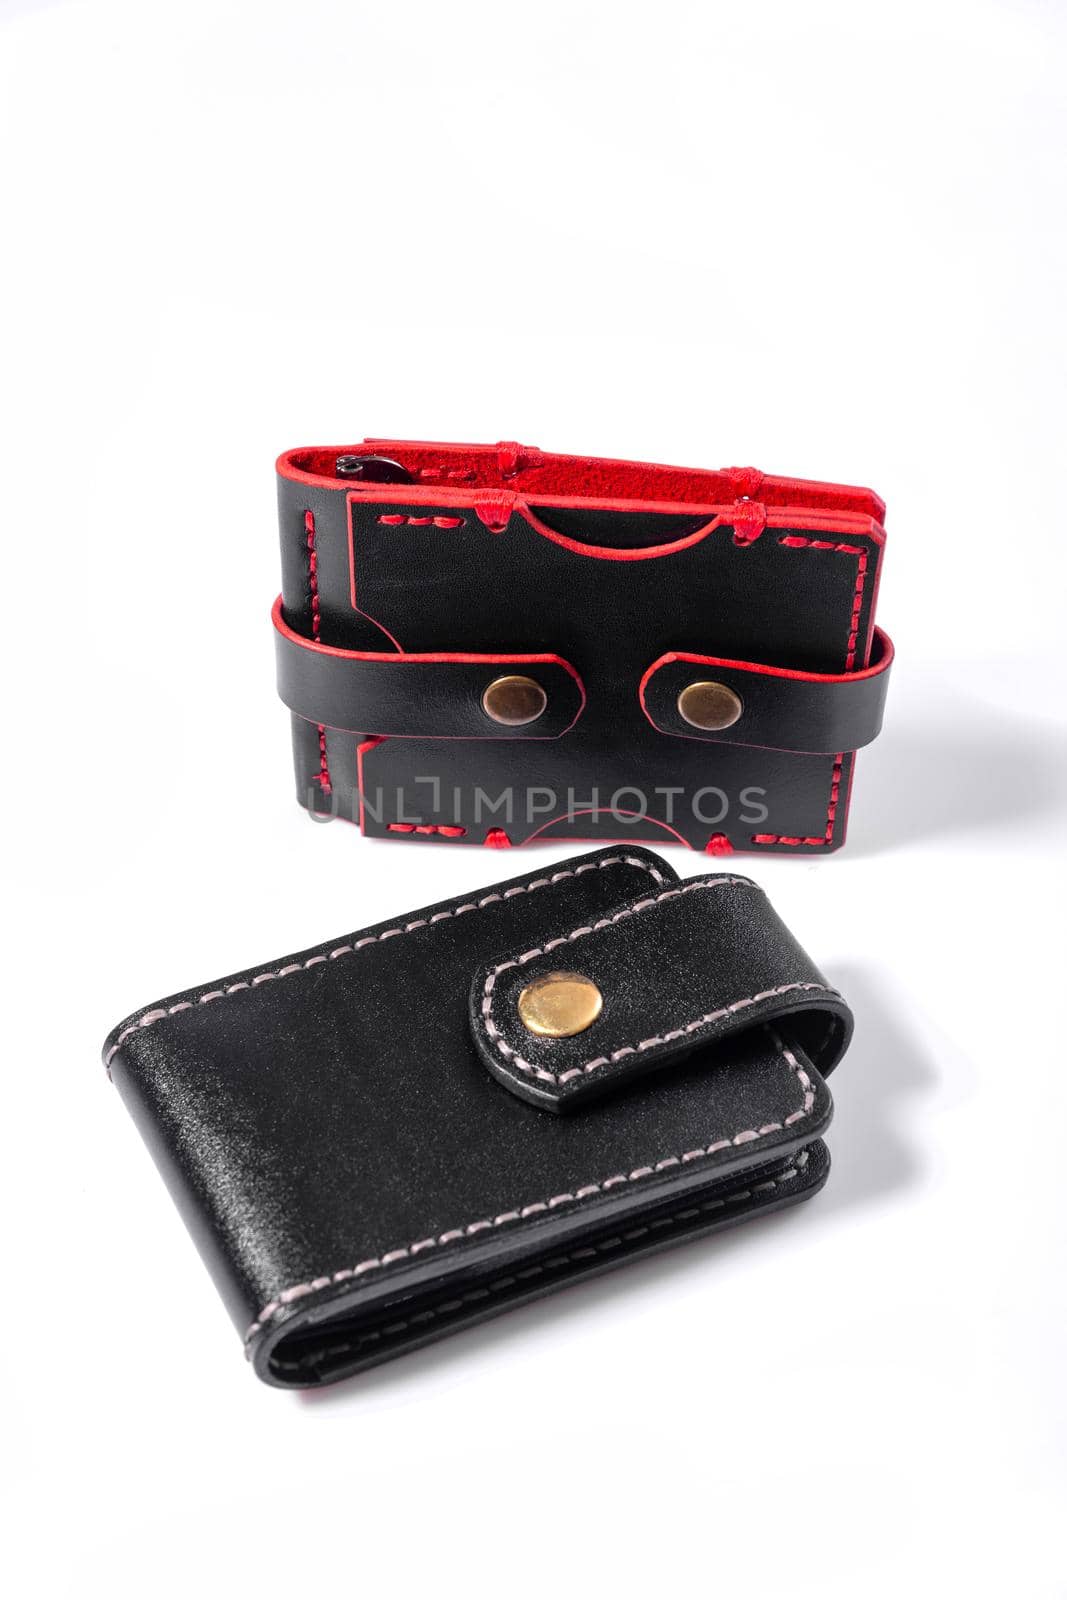 Luxury craft business card holder case and black mans wallet made of leather isolated on white background.